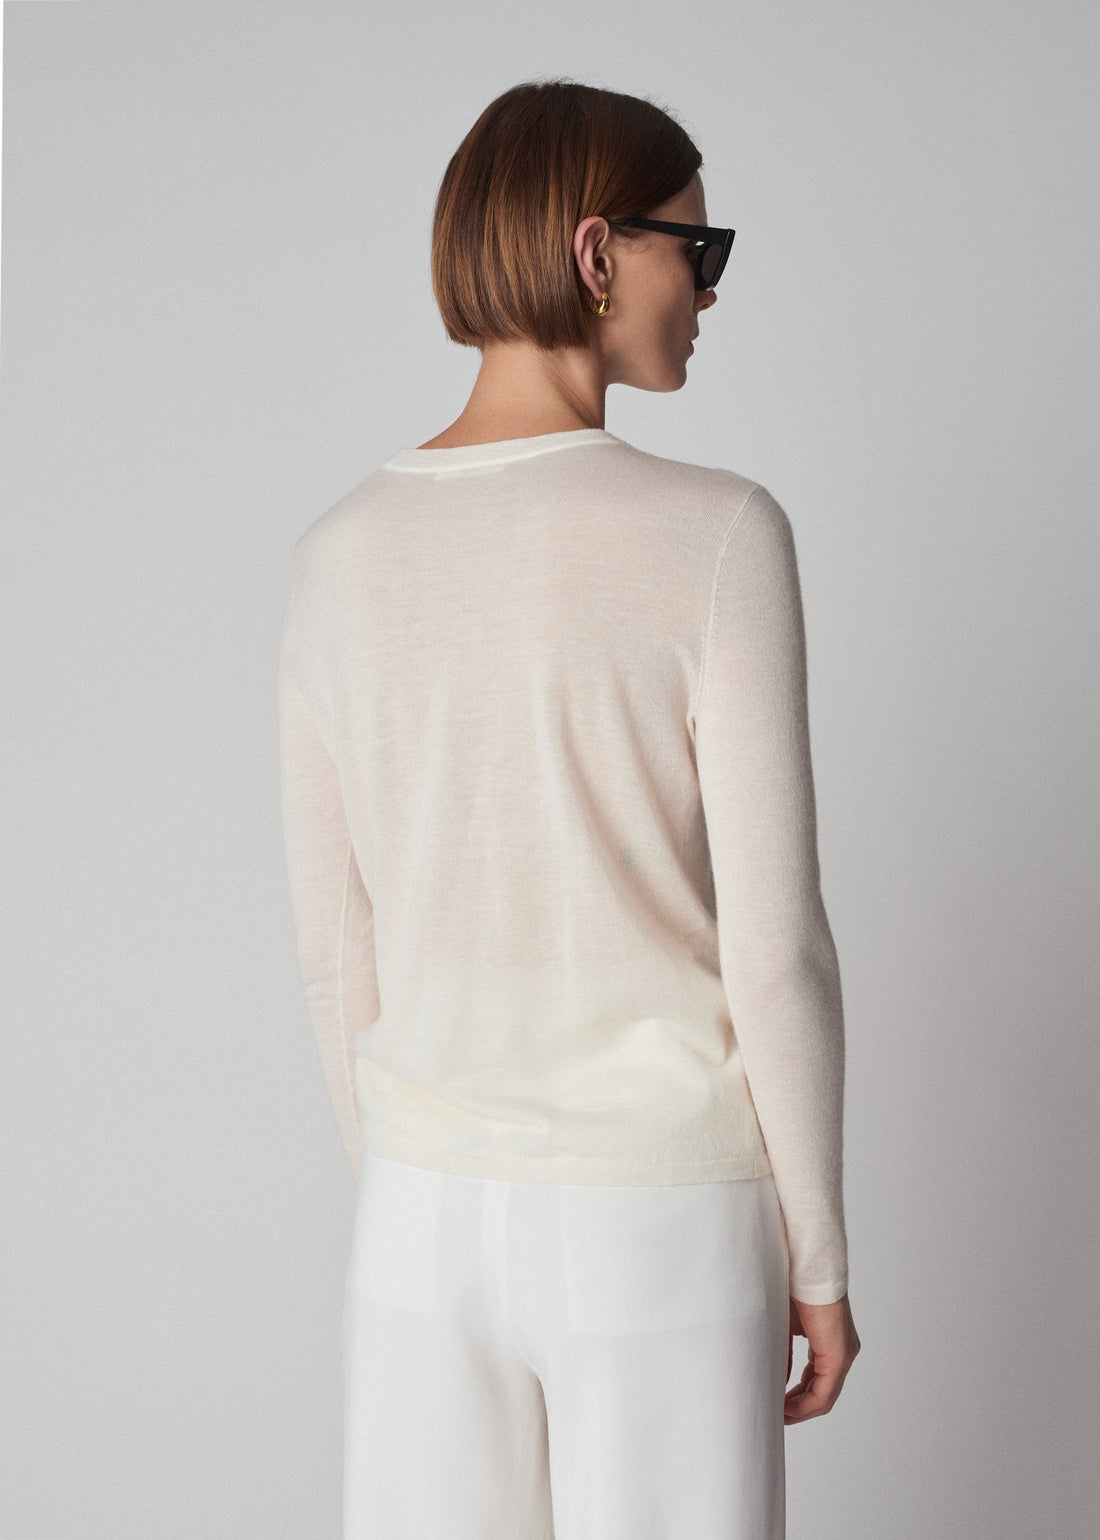 CO Long Sleeve Crew Sweater in Fine Cashmere